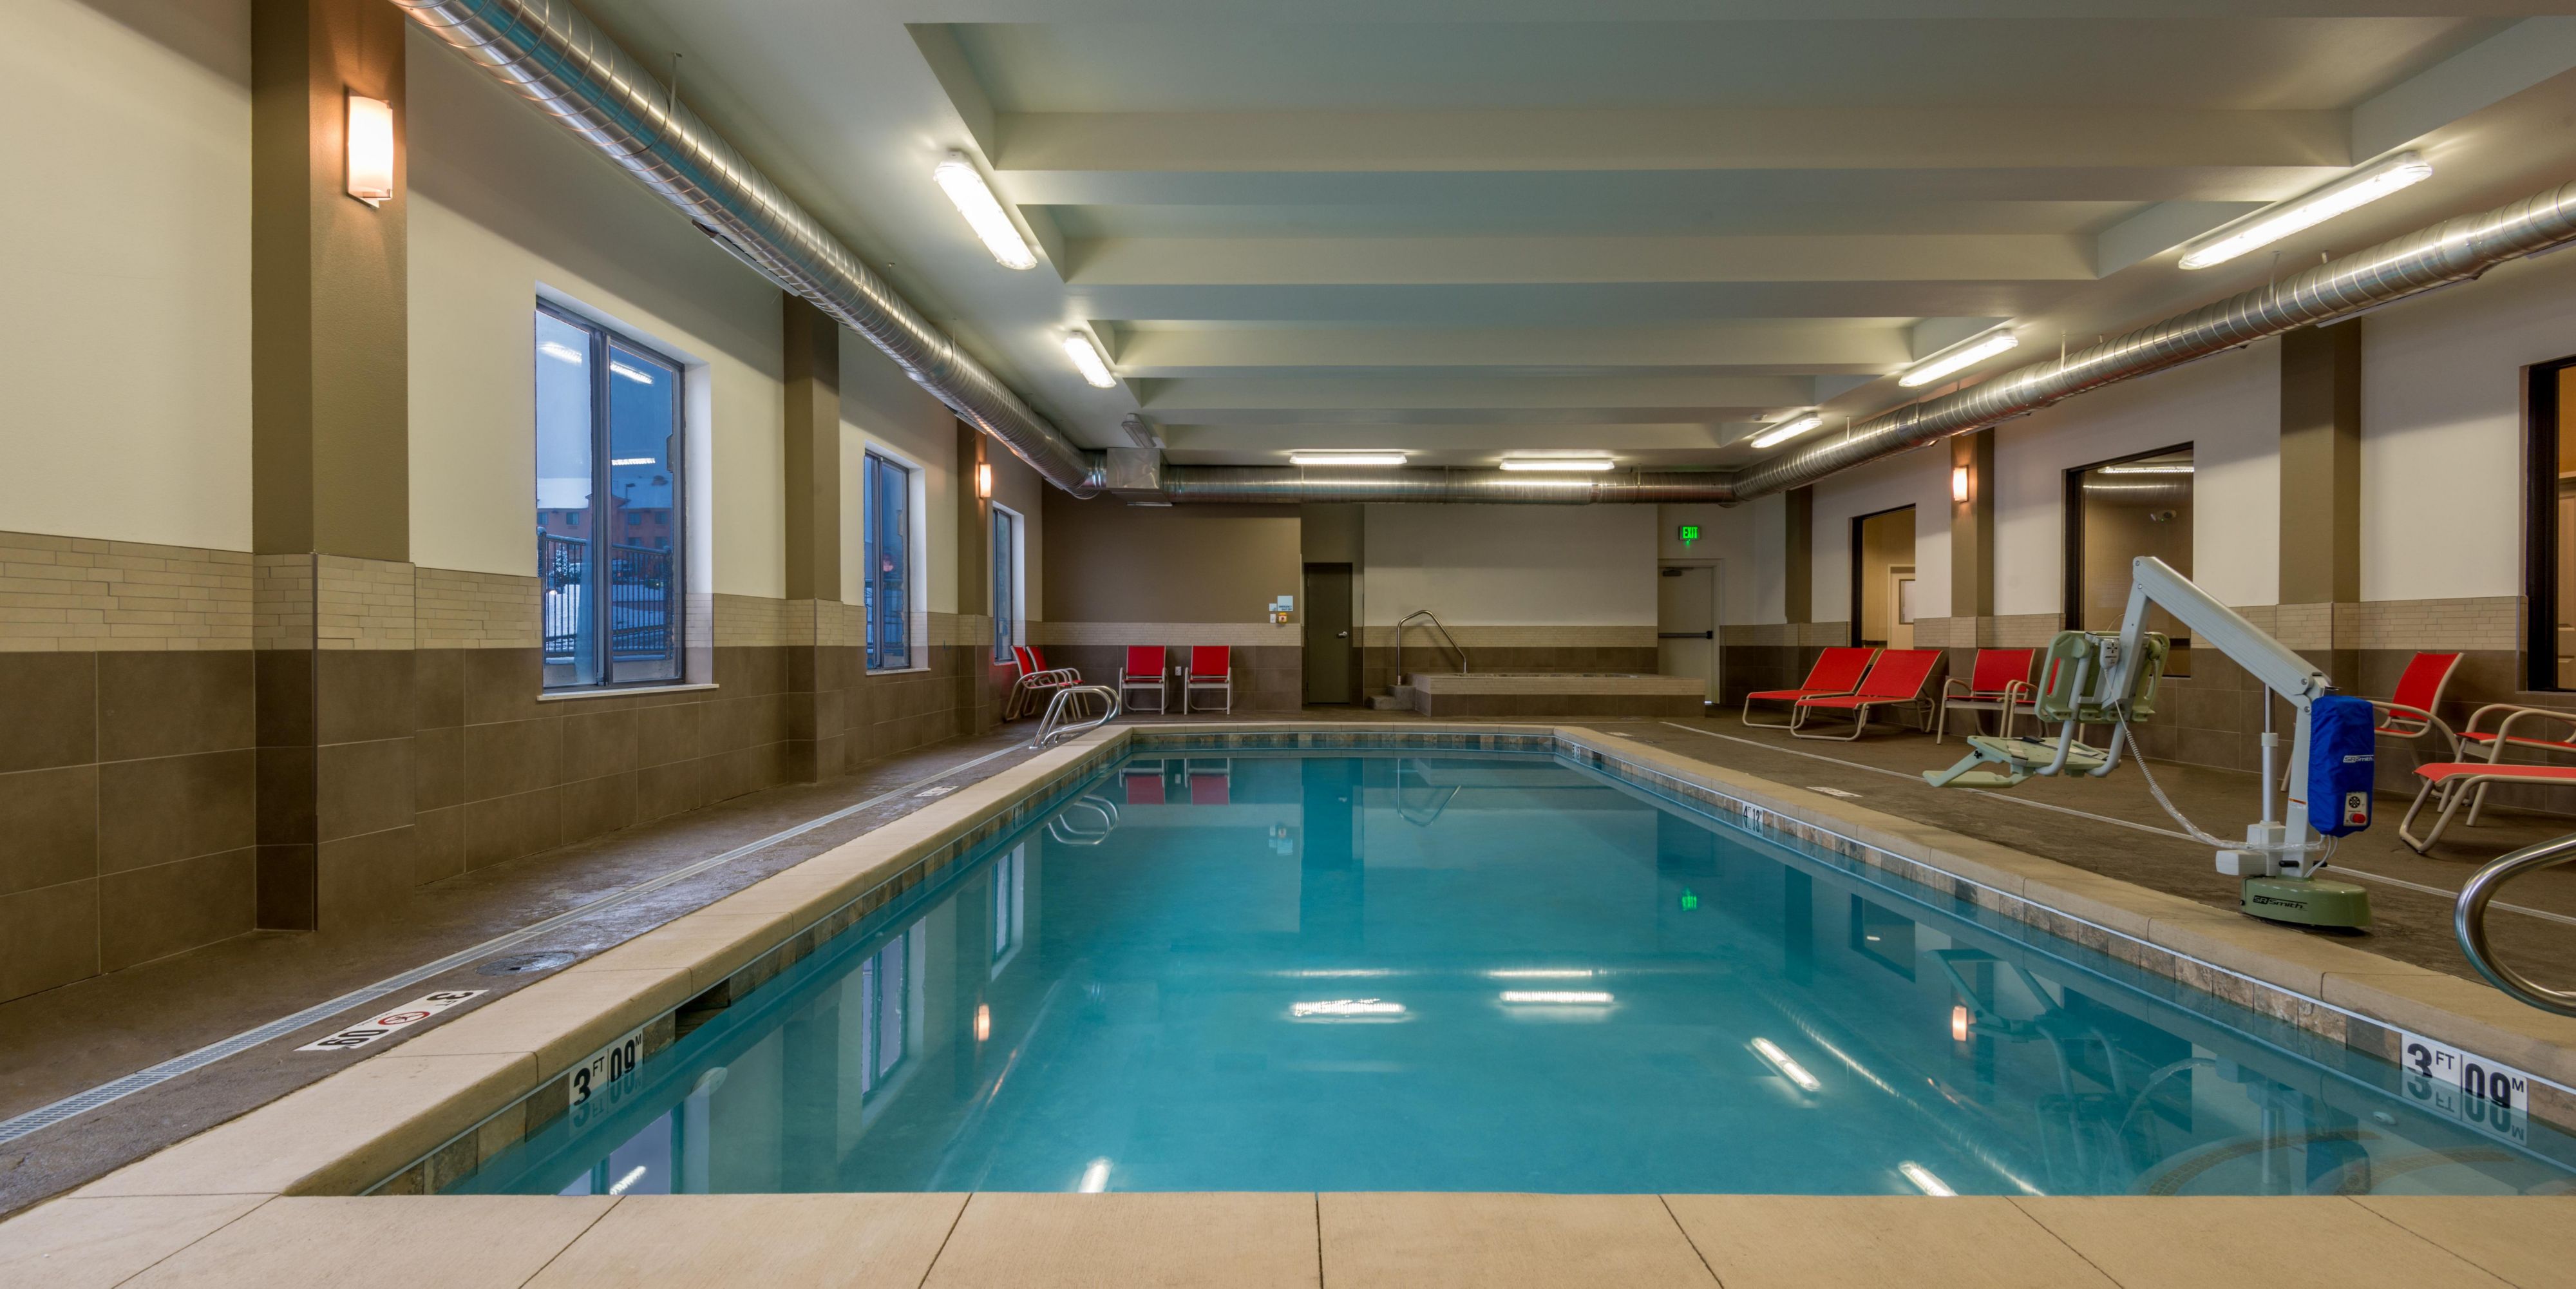 Our Pool is designed to make any kid smile and business traveler unwind from an active day. Fresh towels are always on hand and don't forget to visit our Wellness station in the hotel lobby, complete with healthy snacks and sports drinks